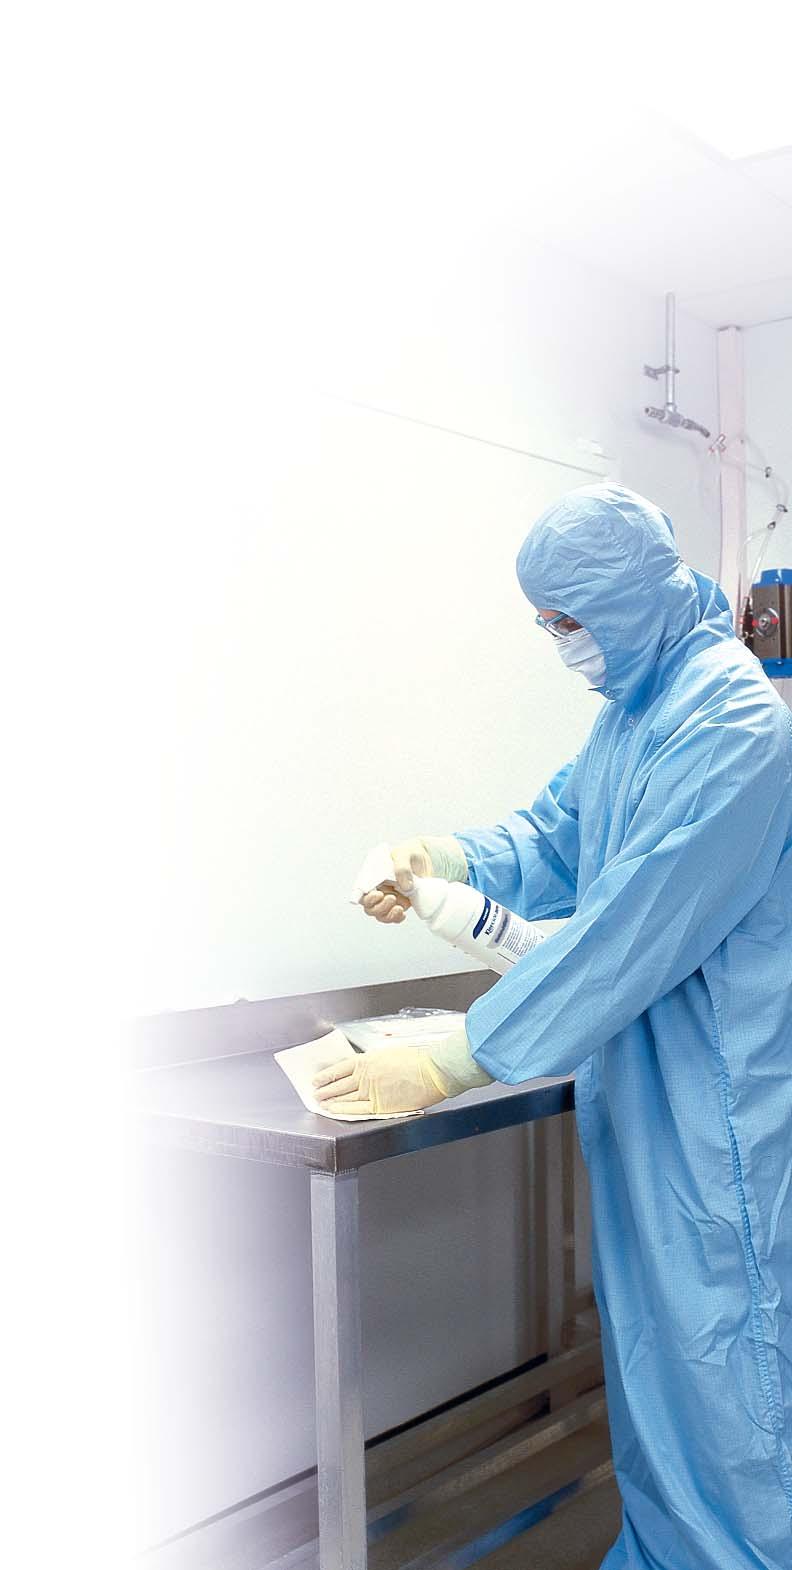 Contamination Control Sources of contamination Contamination can enter the cleanroom on raw materials, packaging, personnel, equipment and cleaning/disinfection products.